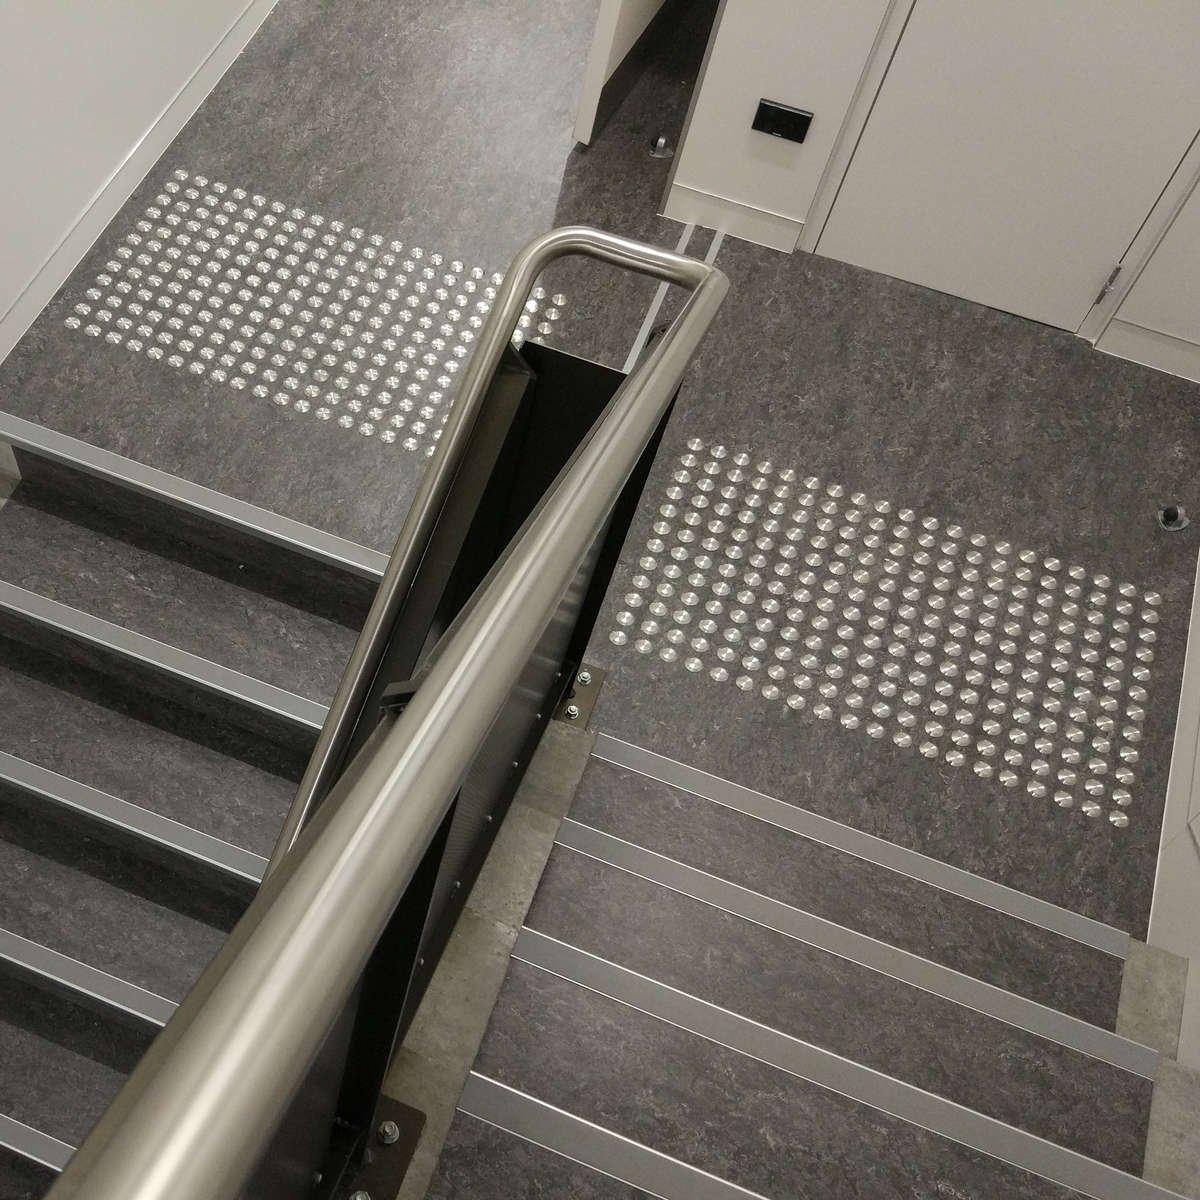 TacPro stainless steel tactile indicators on lino at the top and bottom of stairs